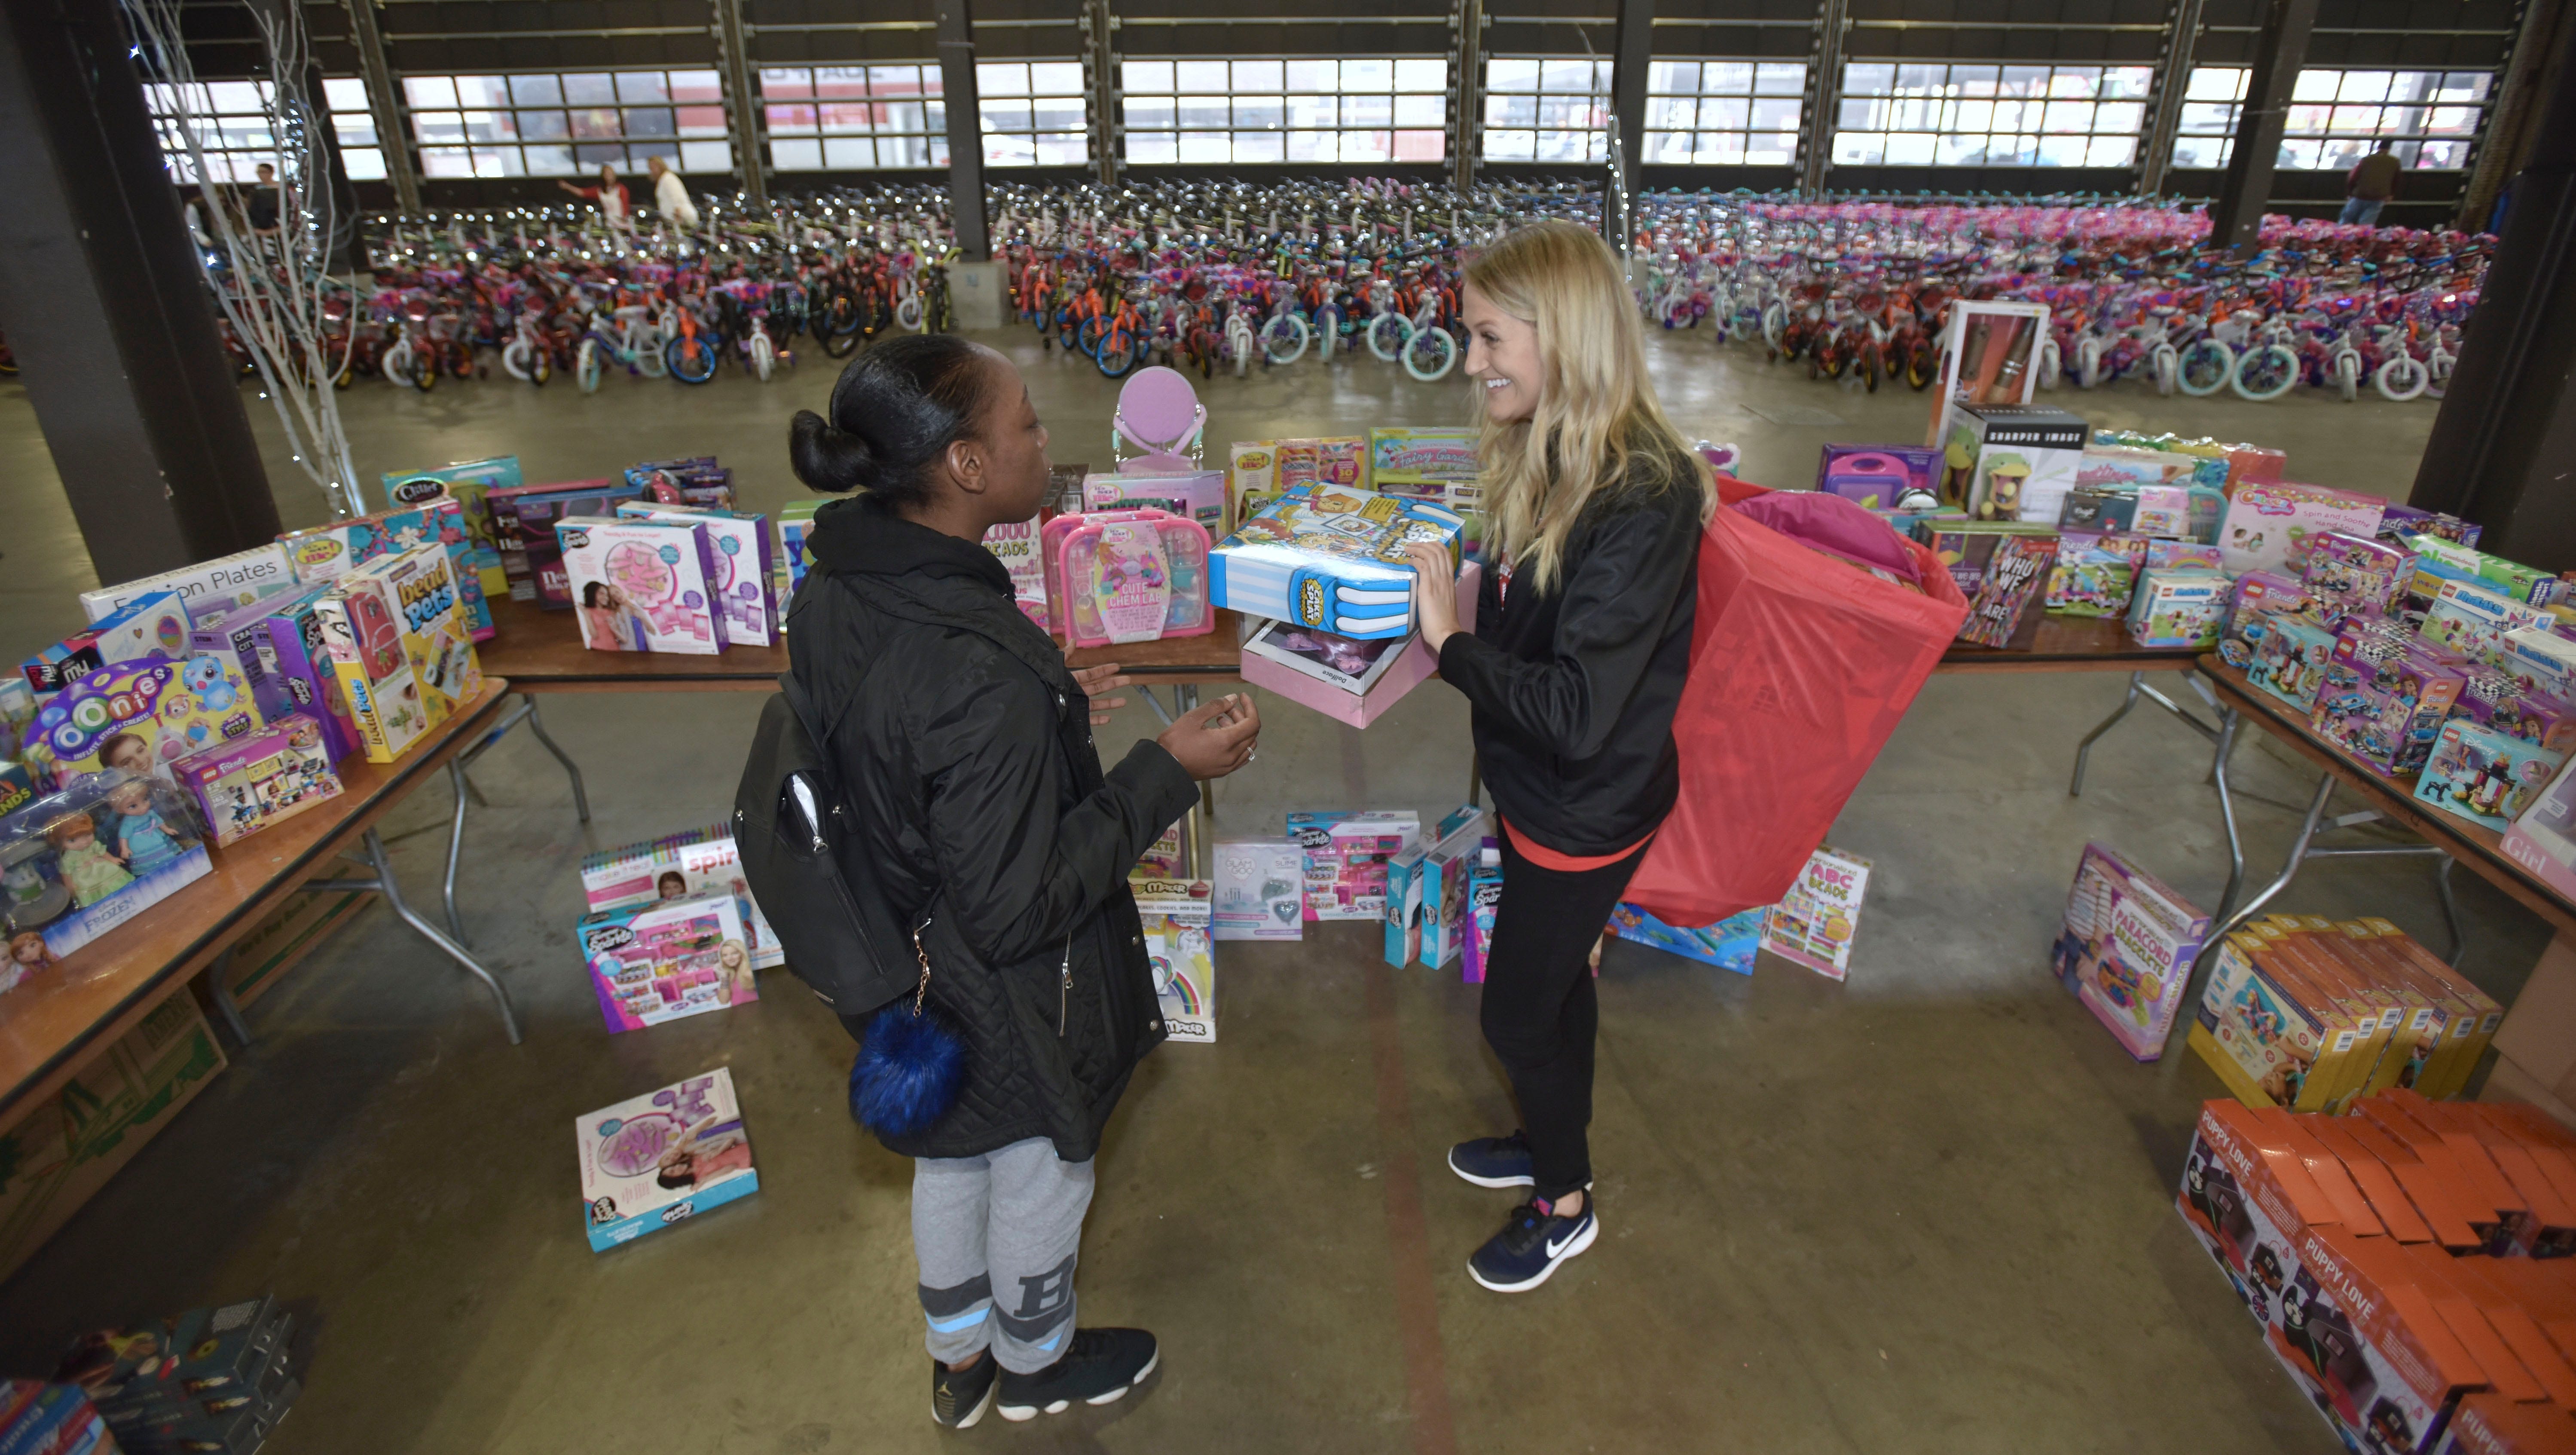 Pistons Community and Social Responsibility Coordinator Chelsey Oeffler, right, carries a bag full of presents as she helps Brenda Jones, left, of Hamtramck shop for her three daughters.